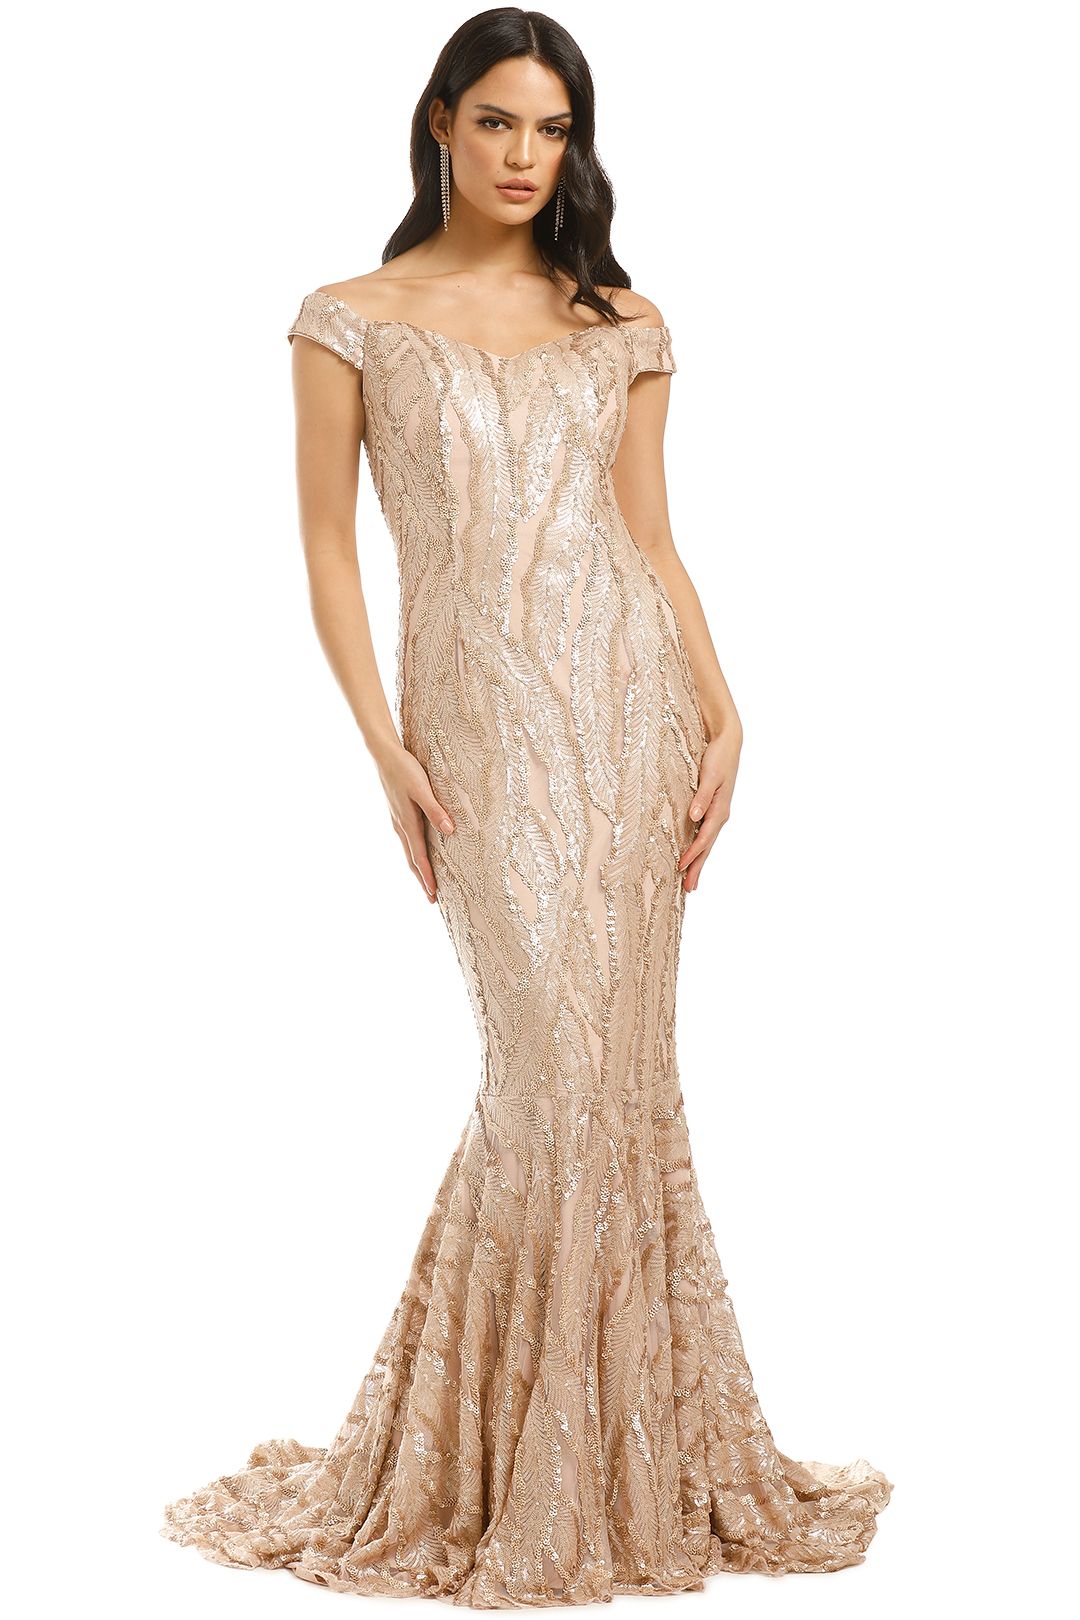 Jadore-Kayley-Gown-Champagne-Front